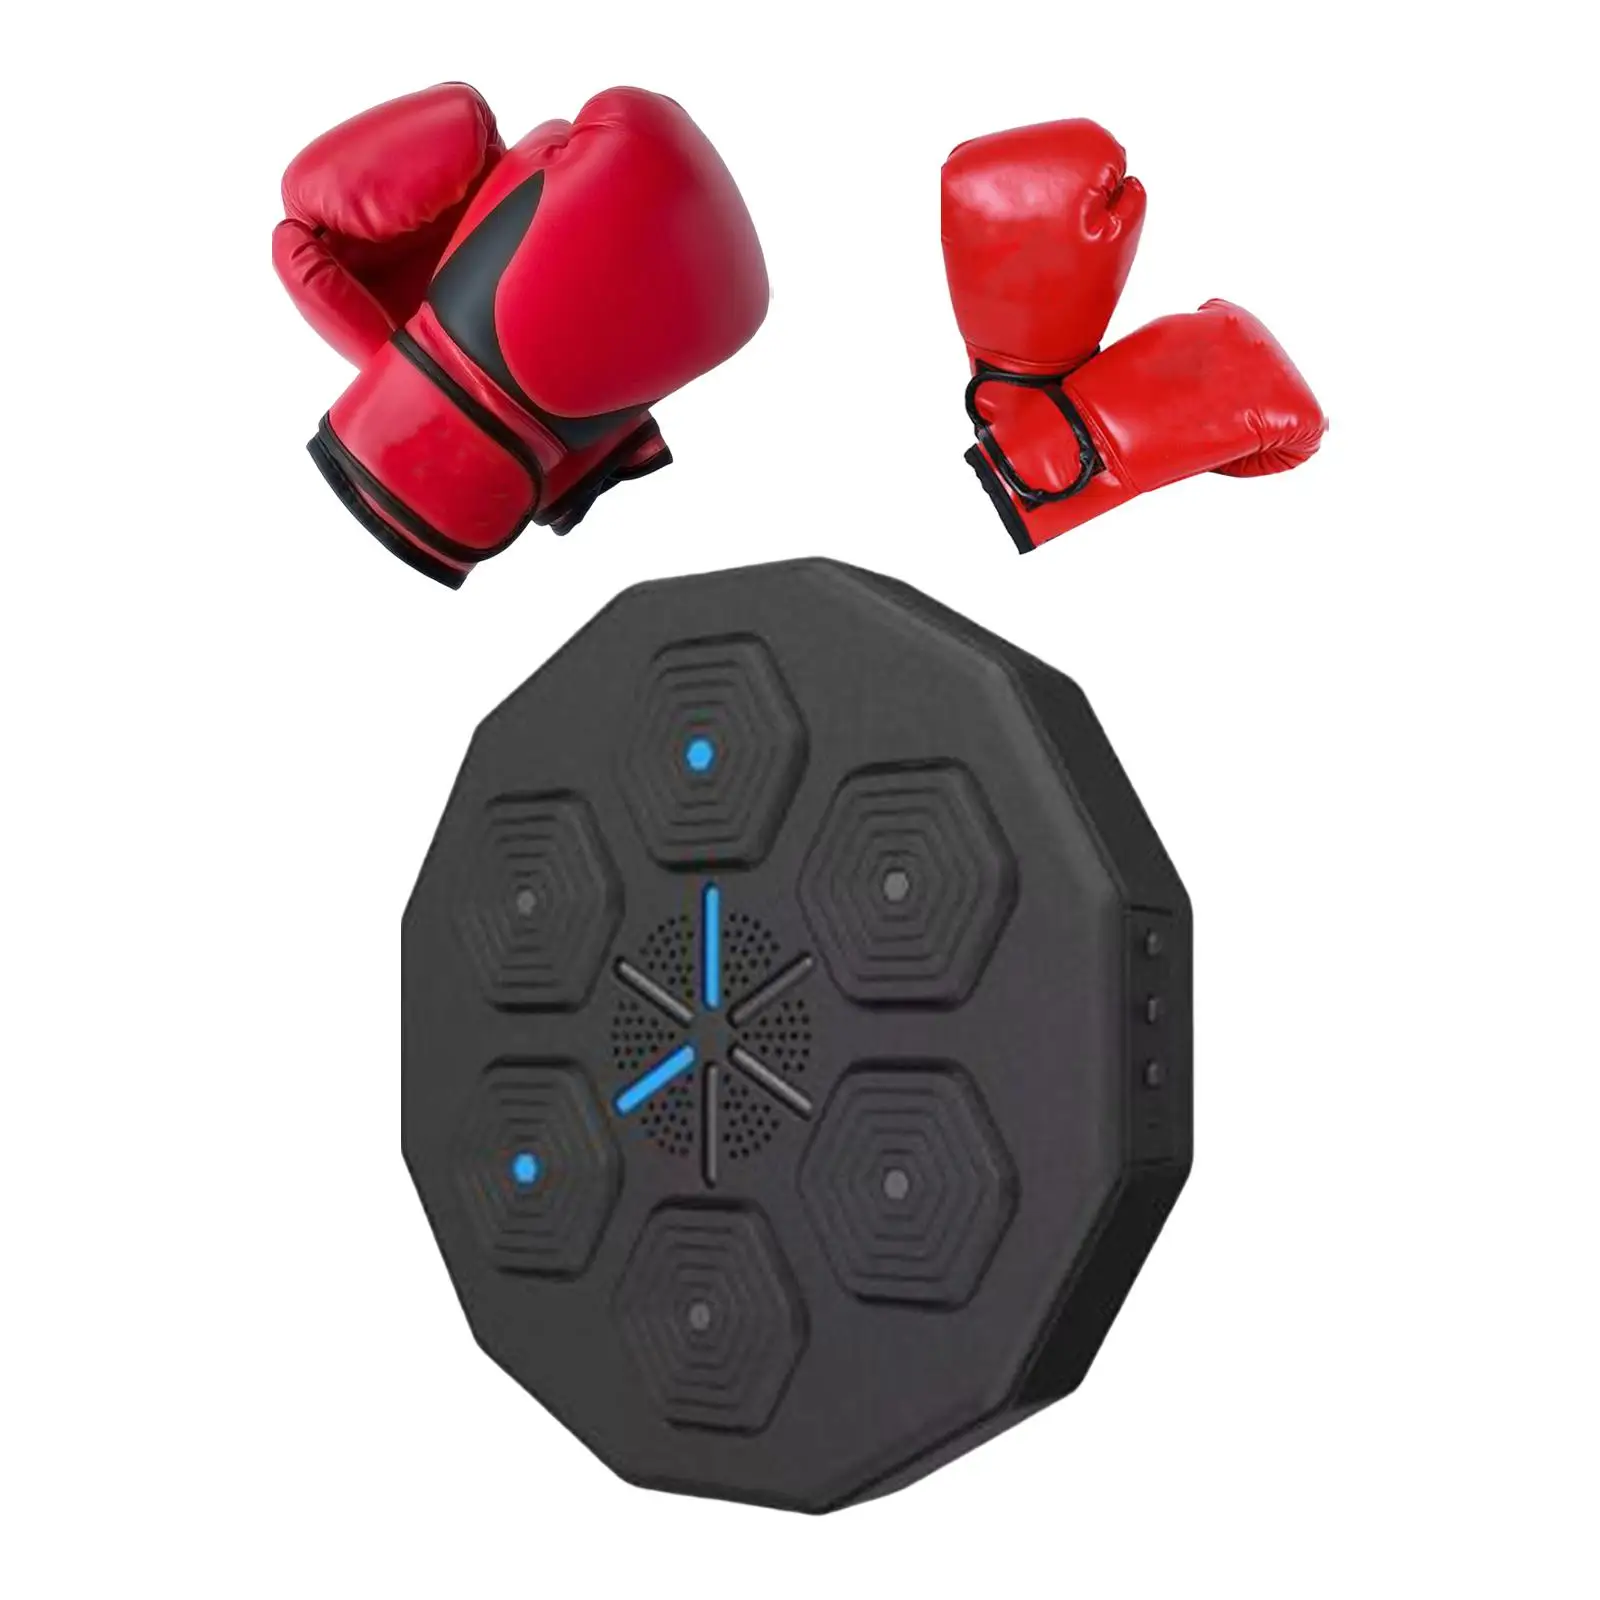 Music Boxing Wall Target Boxing Trainer Kids Adults Training Equipment Punching Pad Rhythm Wall Target for Home Exercise